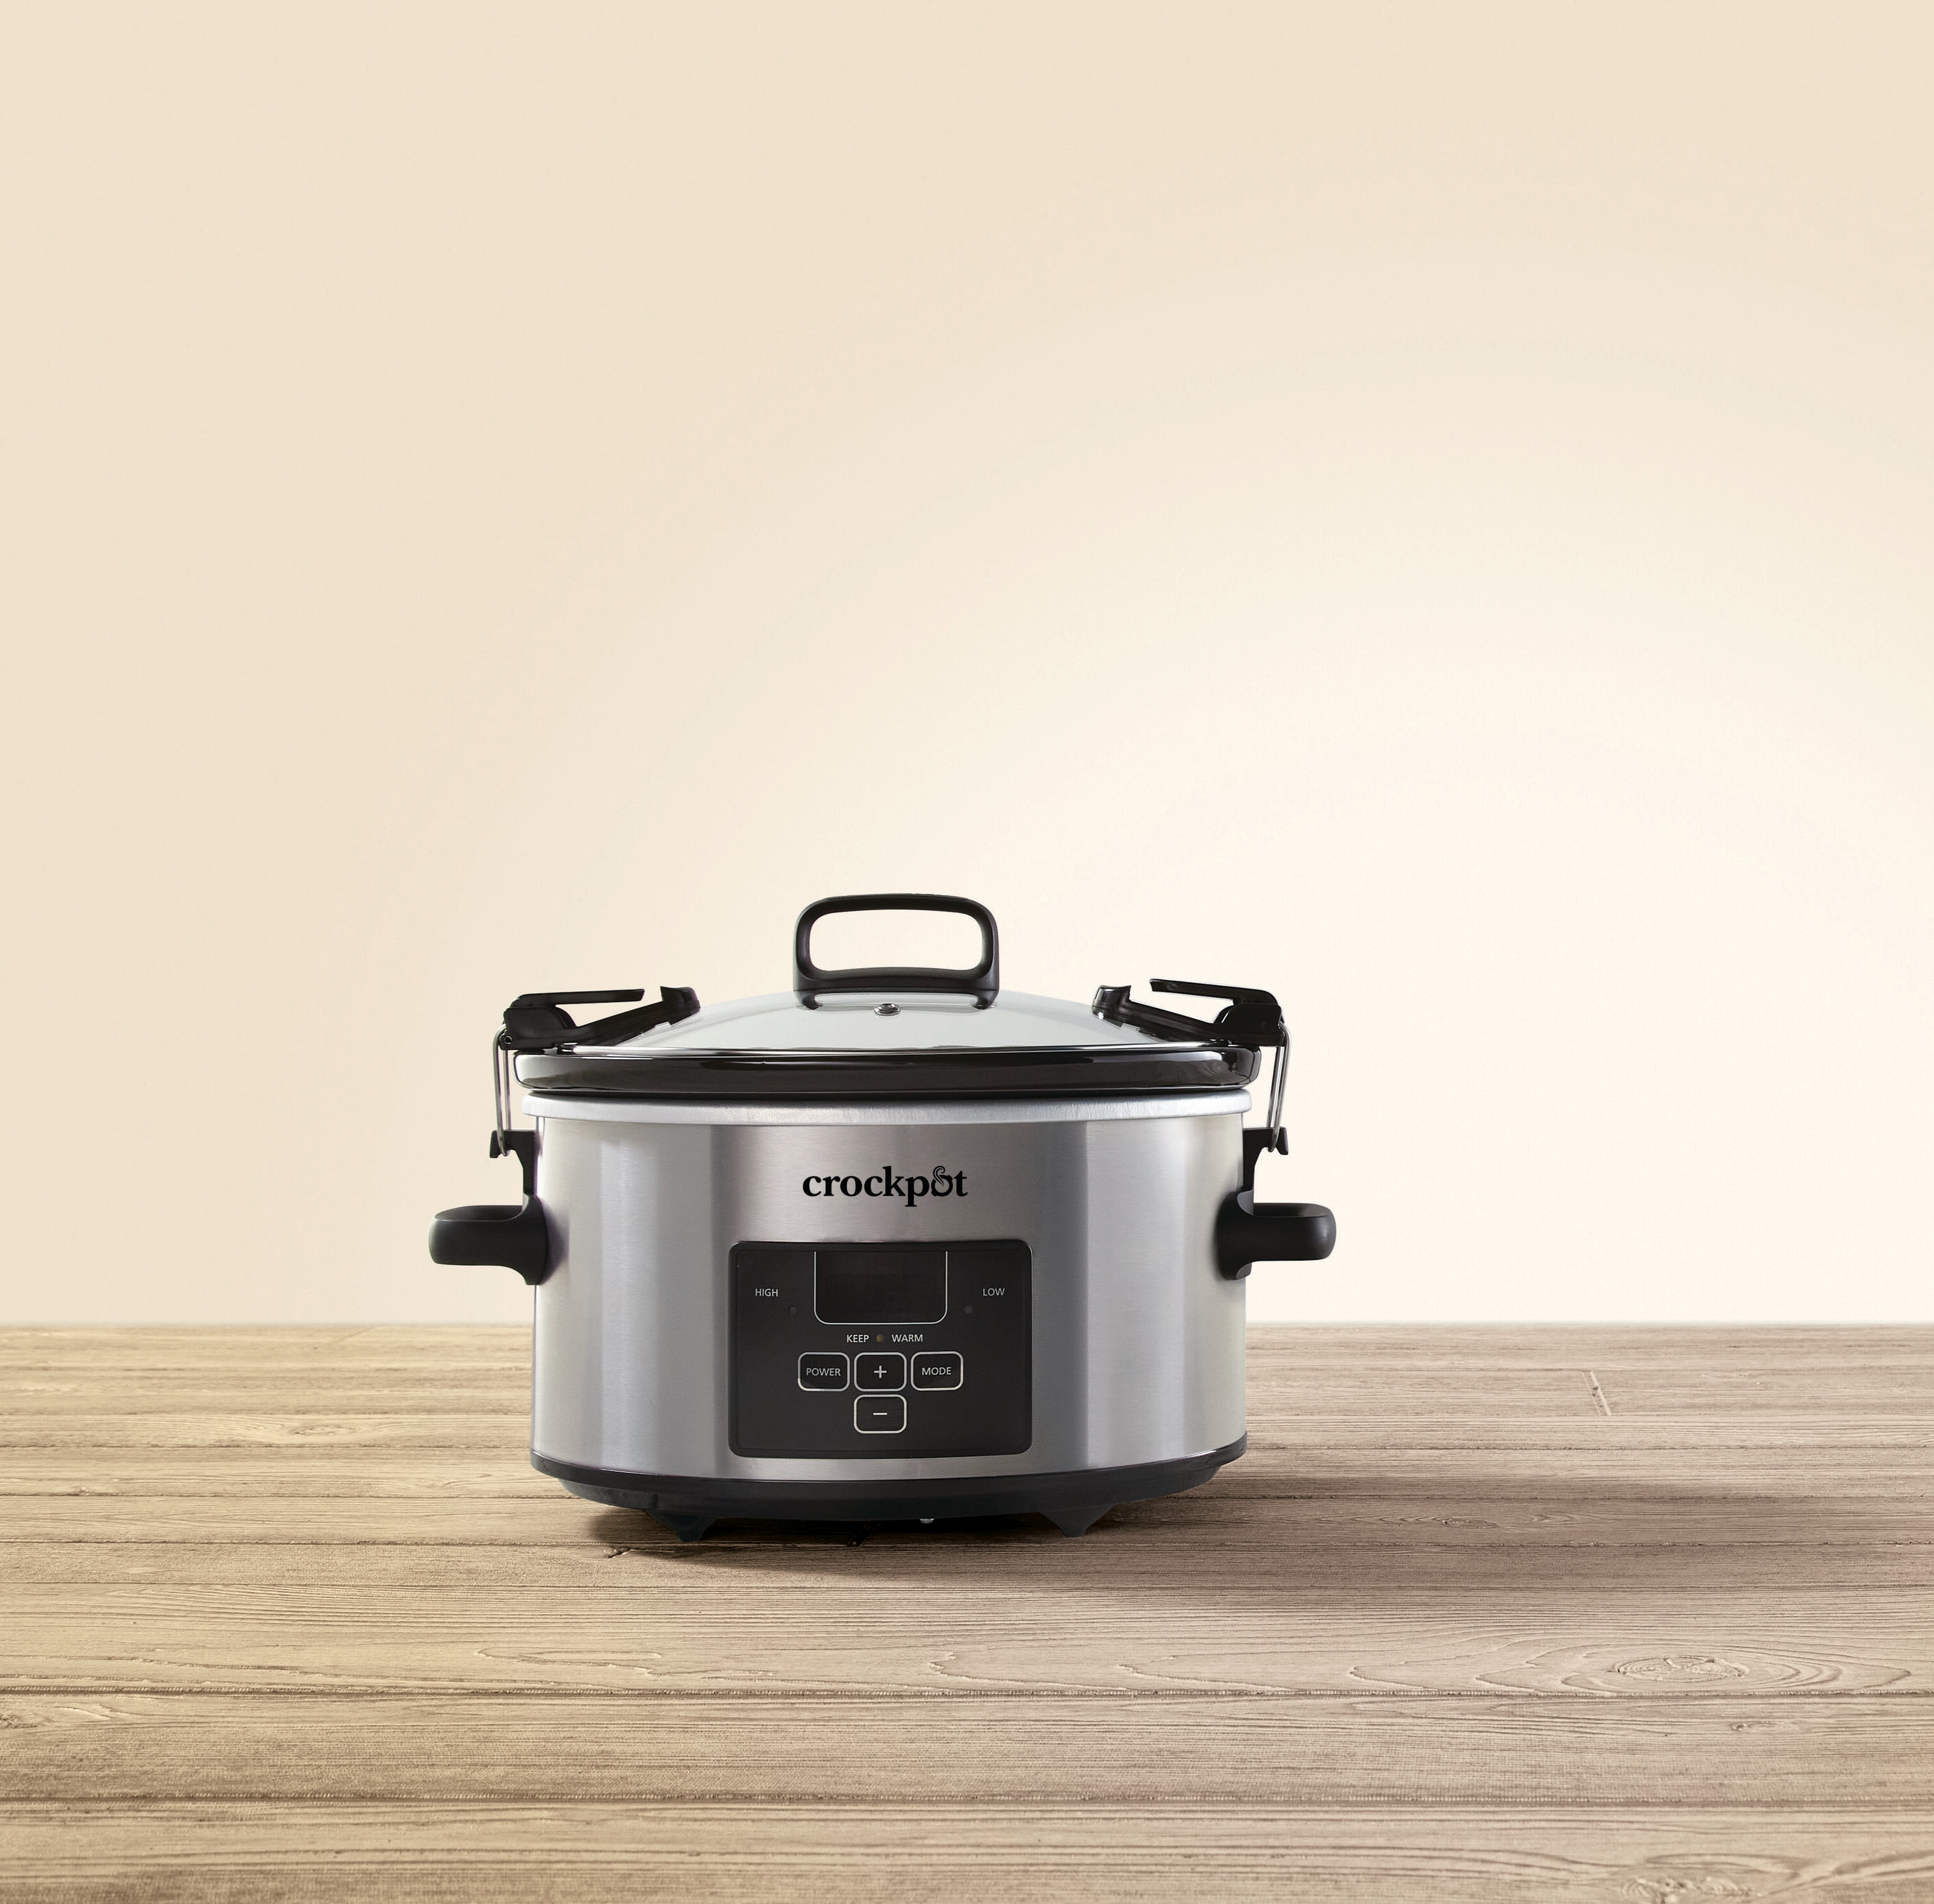 Crock-Pot 4-Quart Stainless Steel Oval Slow Cooker in the Slow